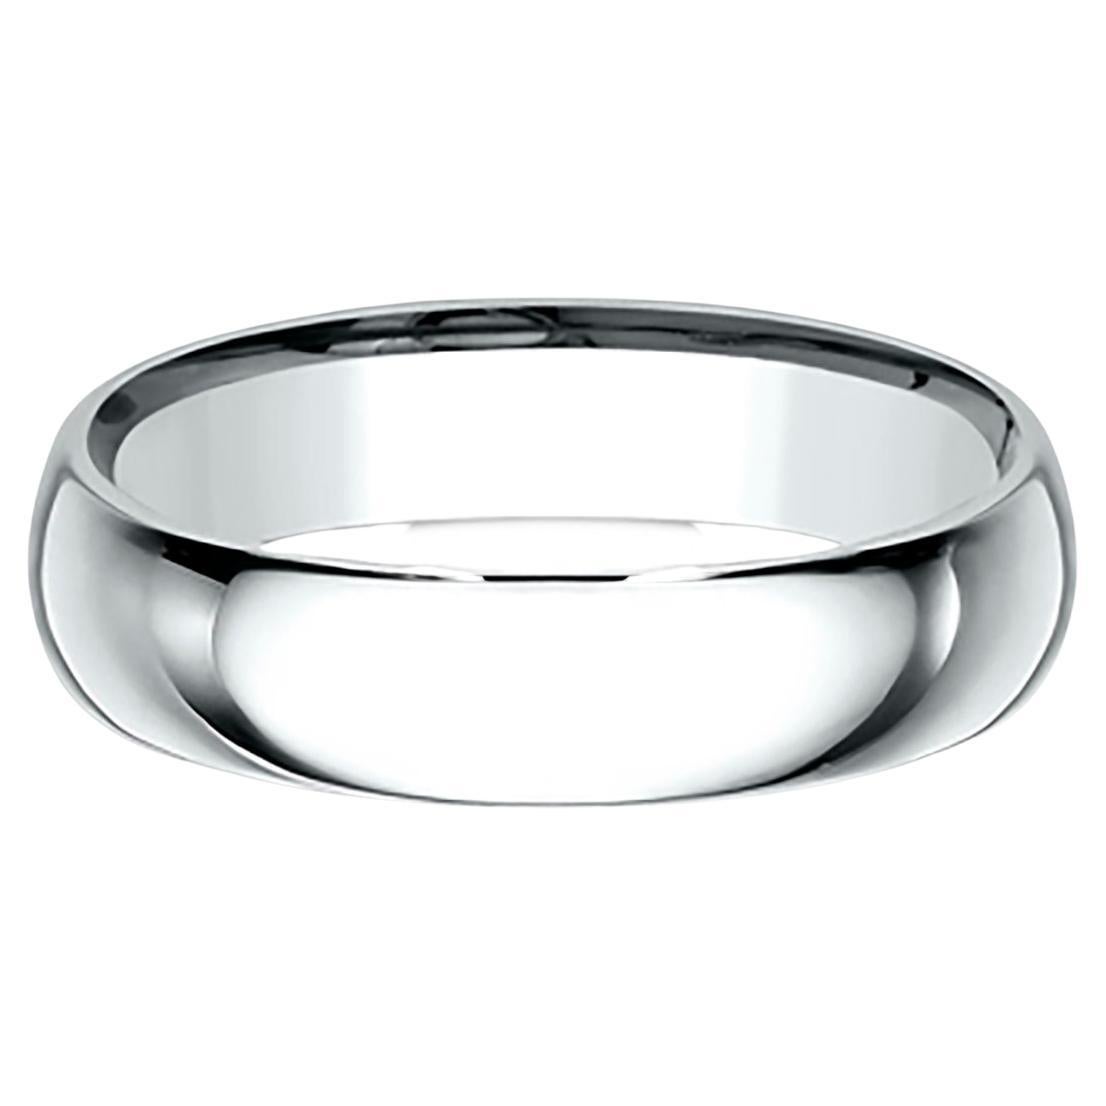 Benchmark Classic Comfort Fit Wedding Band in Platinum, Width 5mm For Sale